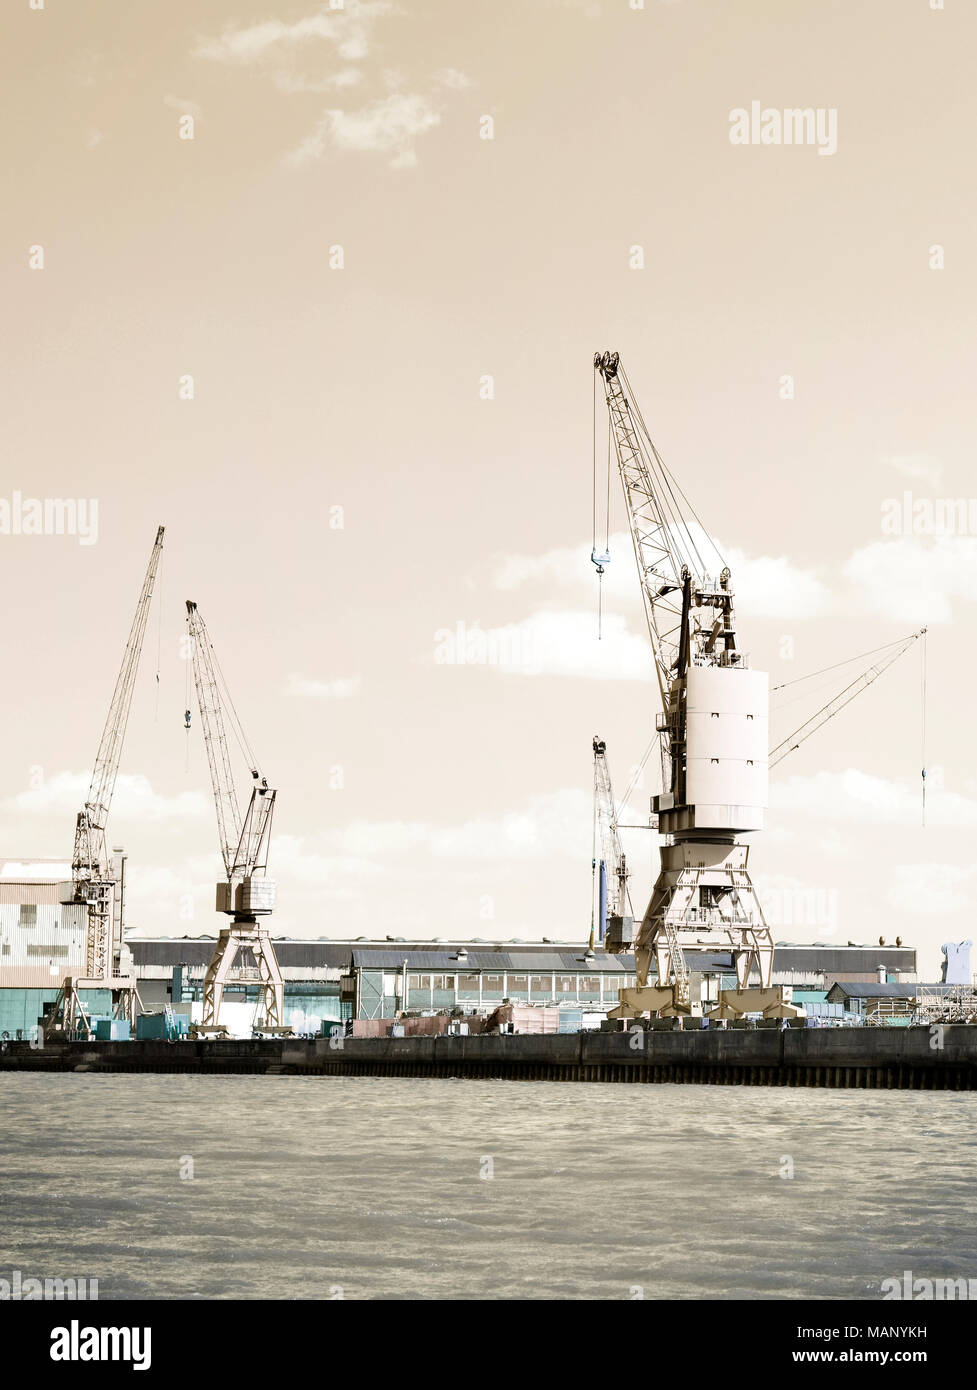 Container harbor with harbor cranes or freight cranes. Warf or cargo shipping scene, industrial transportation or shipping scene. Hamburg harbor. Stock Photo